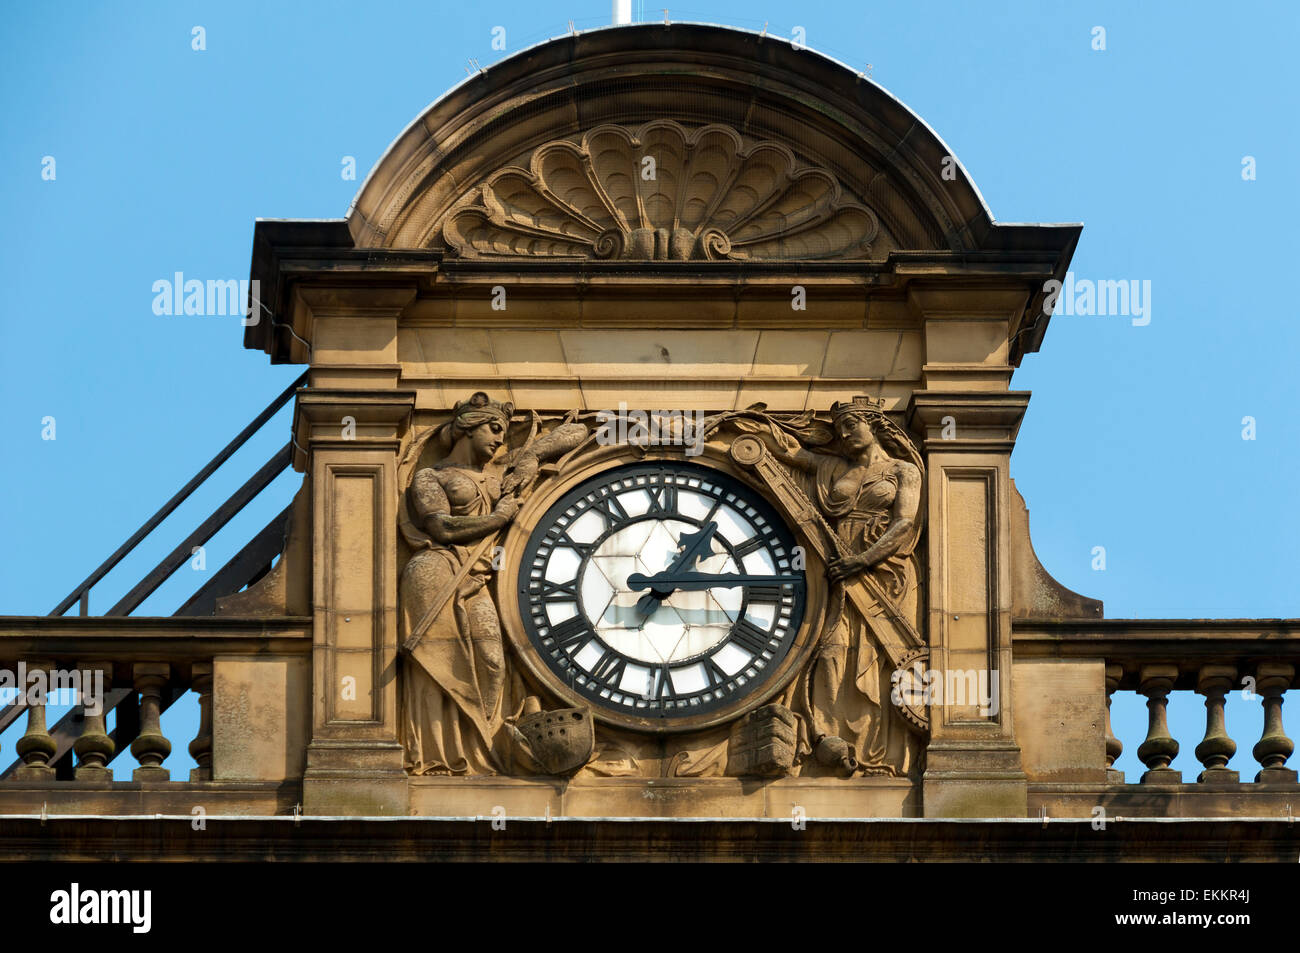 The clock at Victoria Station, Manchester, England, UK Stock Photo